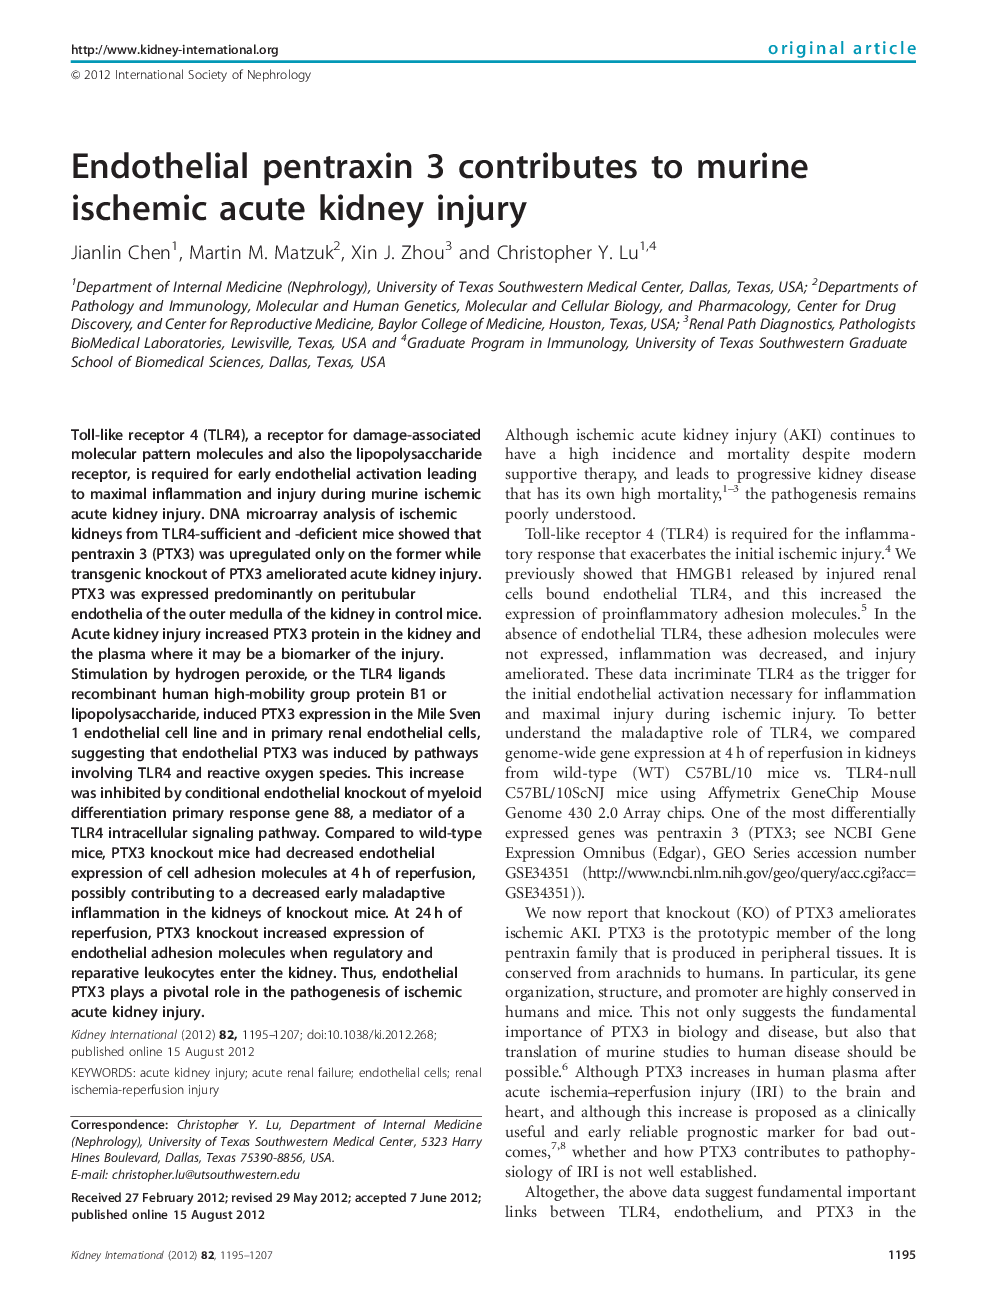 Endothelial pentraxin 3 contributes to murine ischemic acute kidney injury